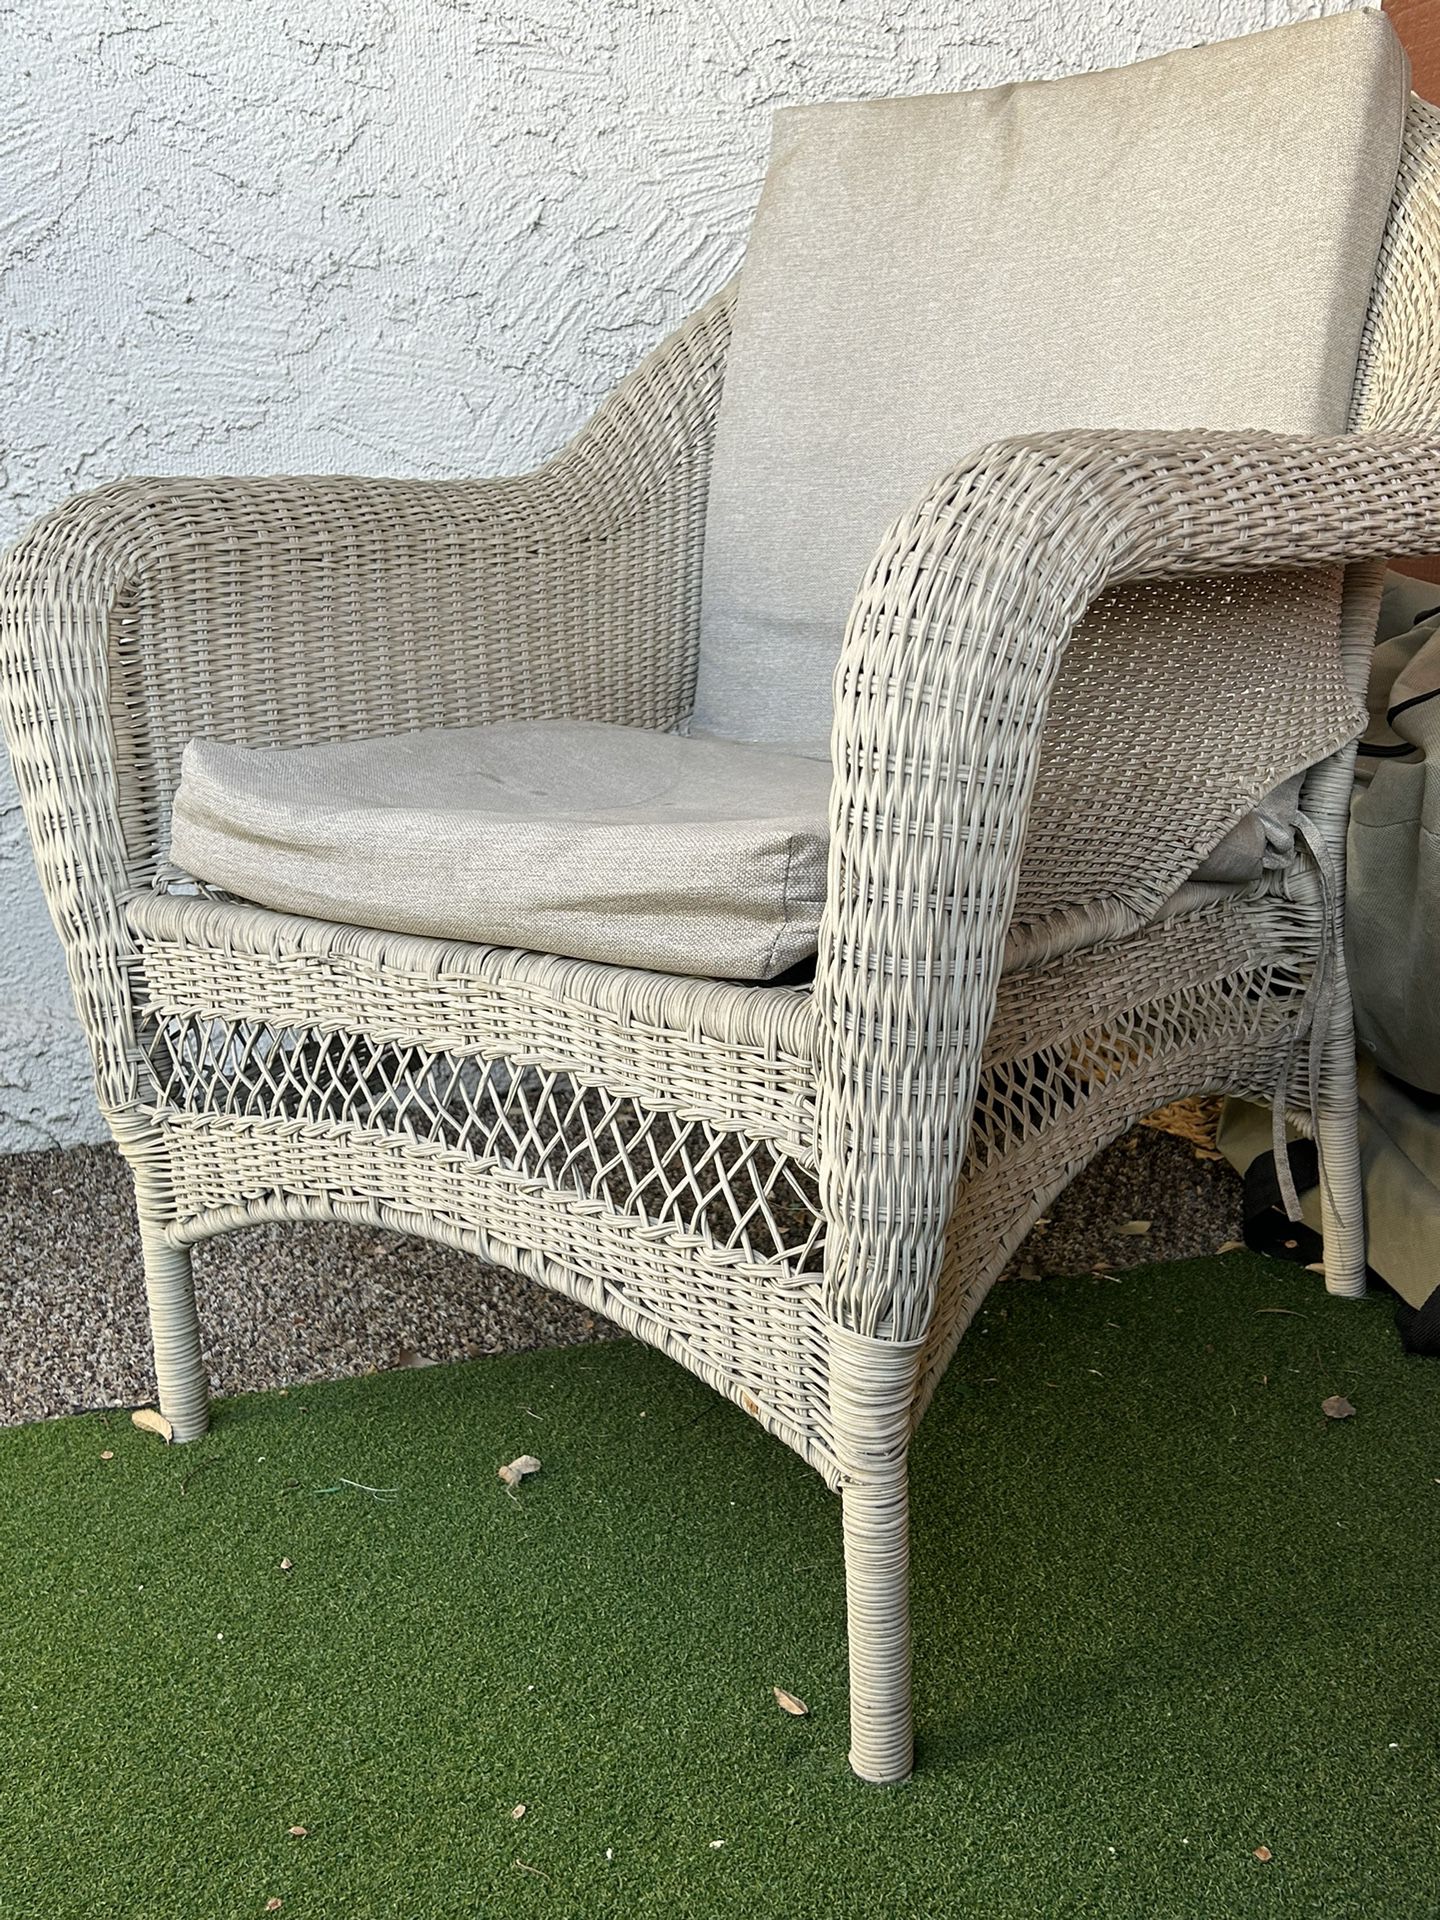 Sonoma Wicker Chairs